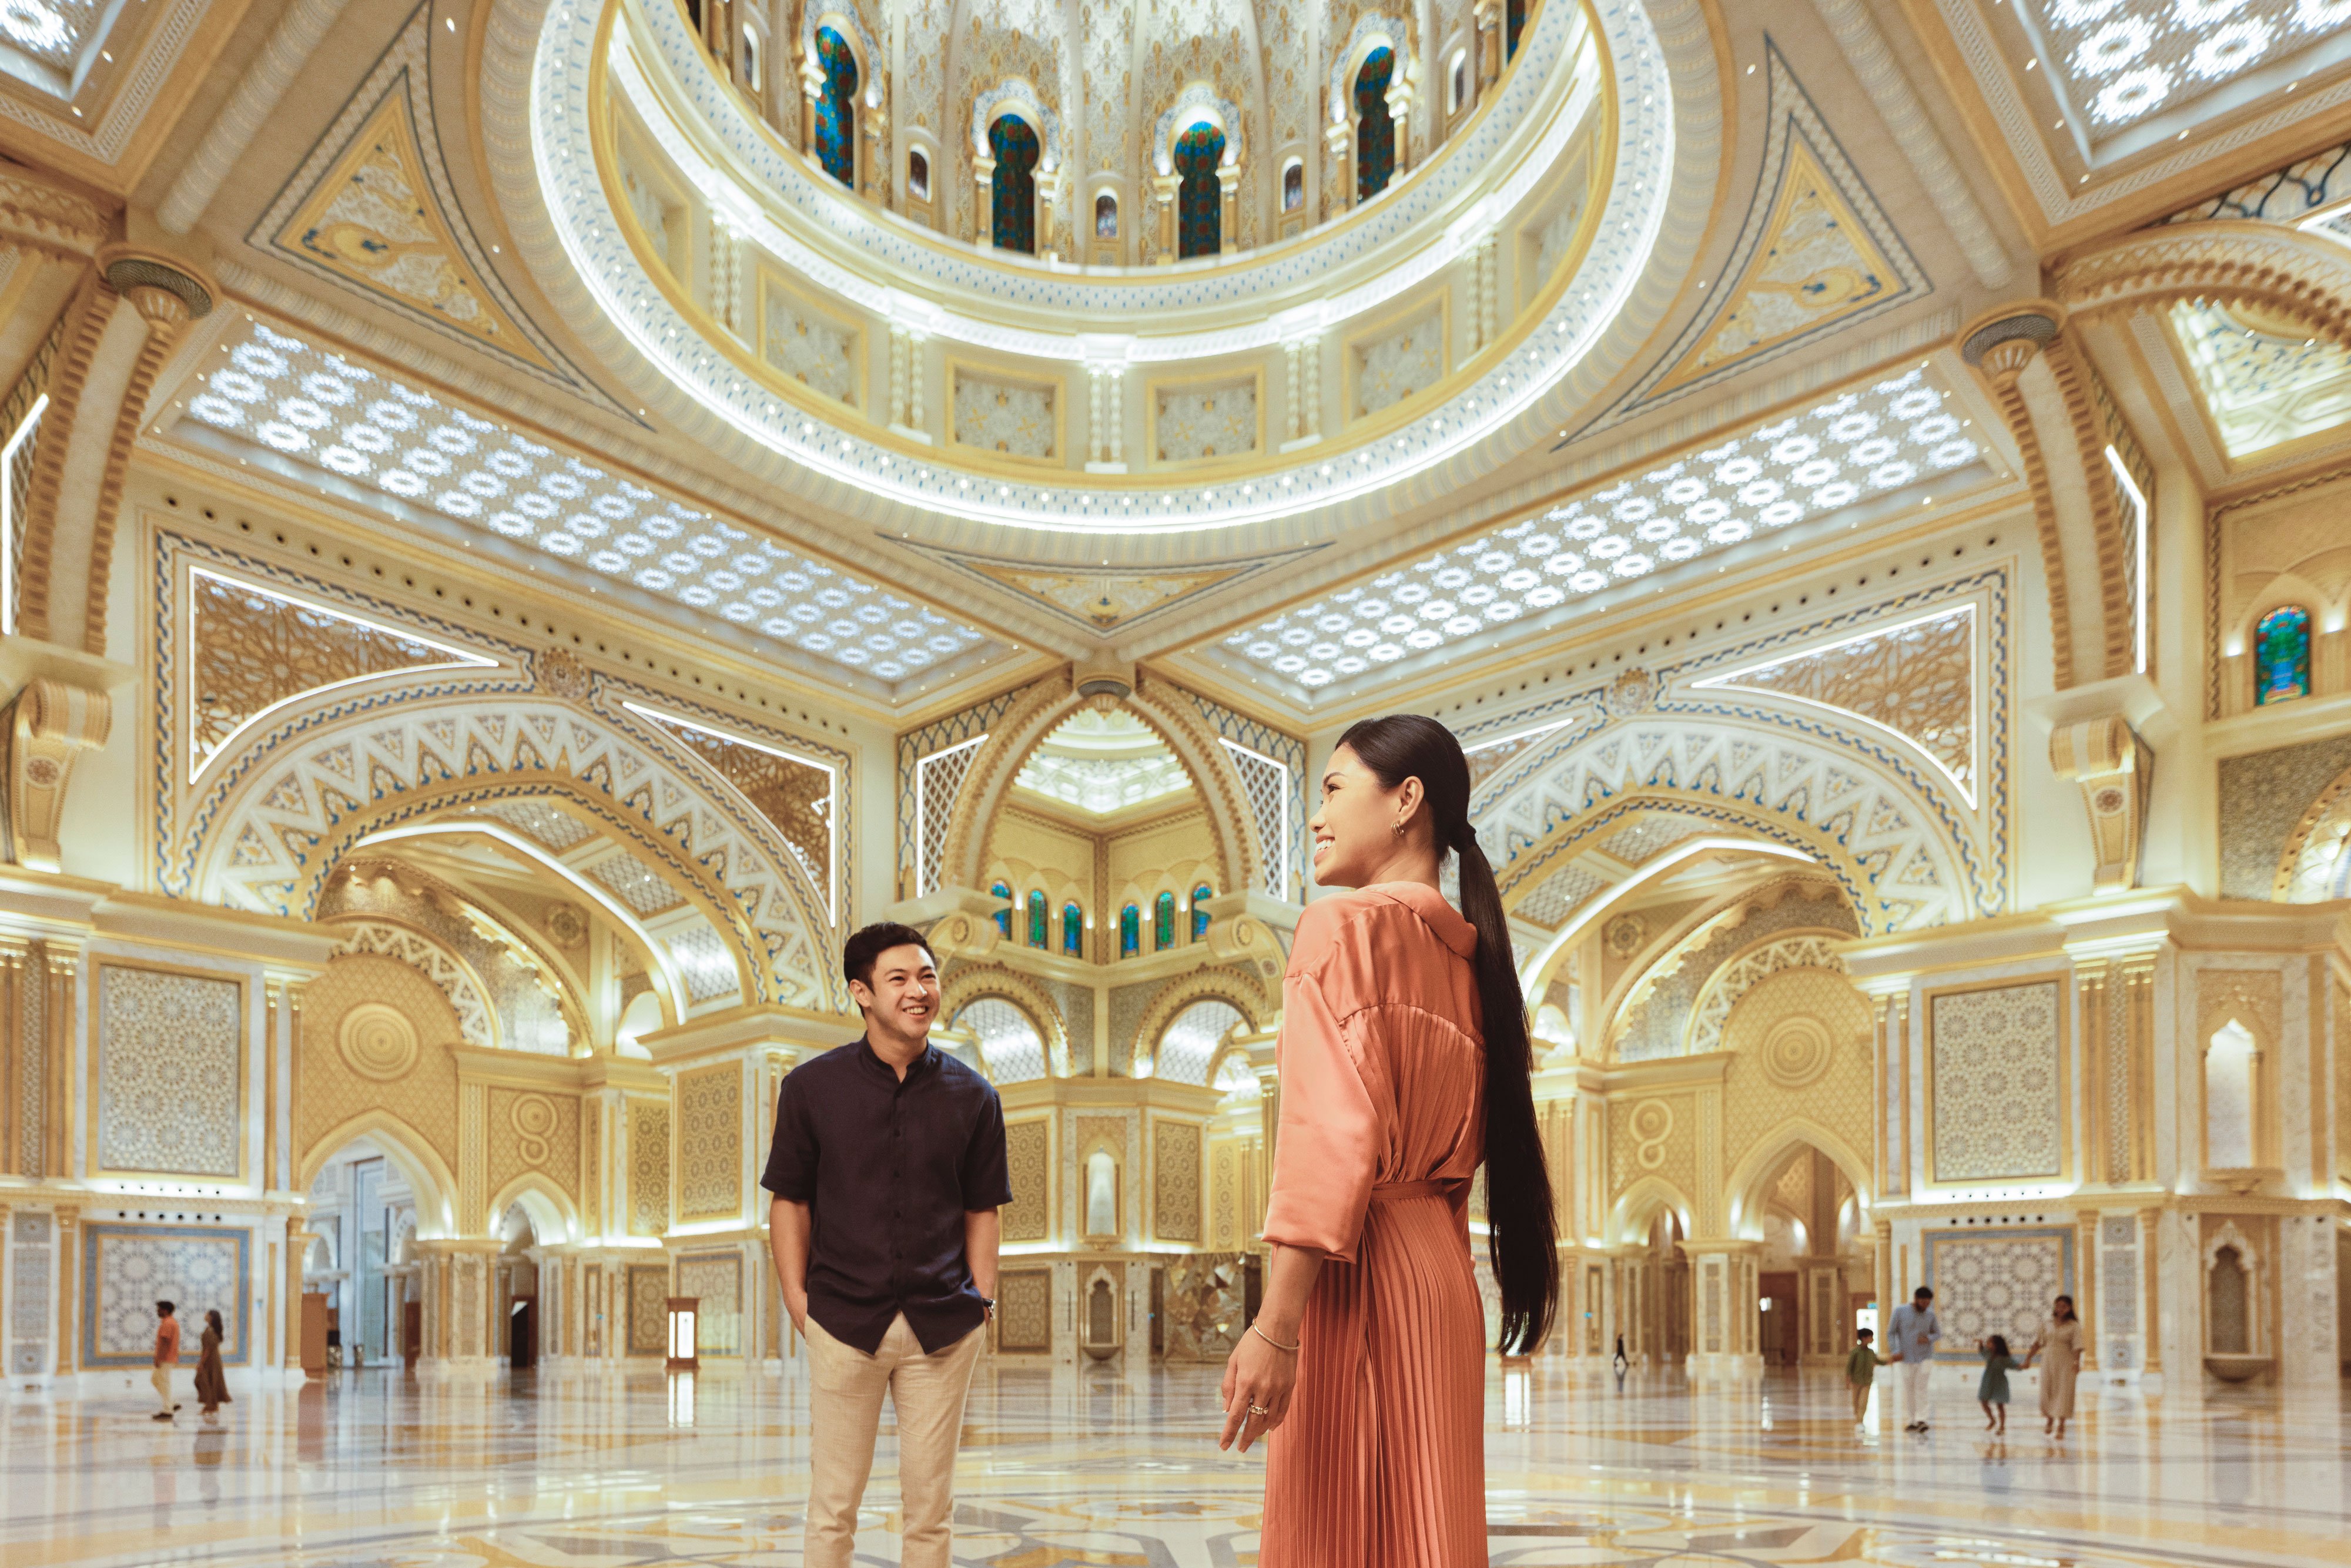 Asian couple smiling and looking at the architecture in Qasr Al Watan